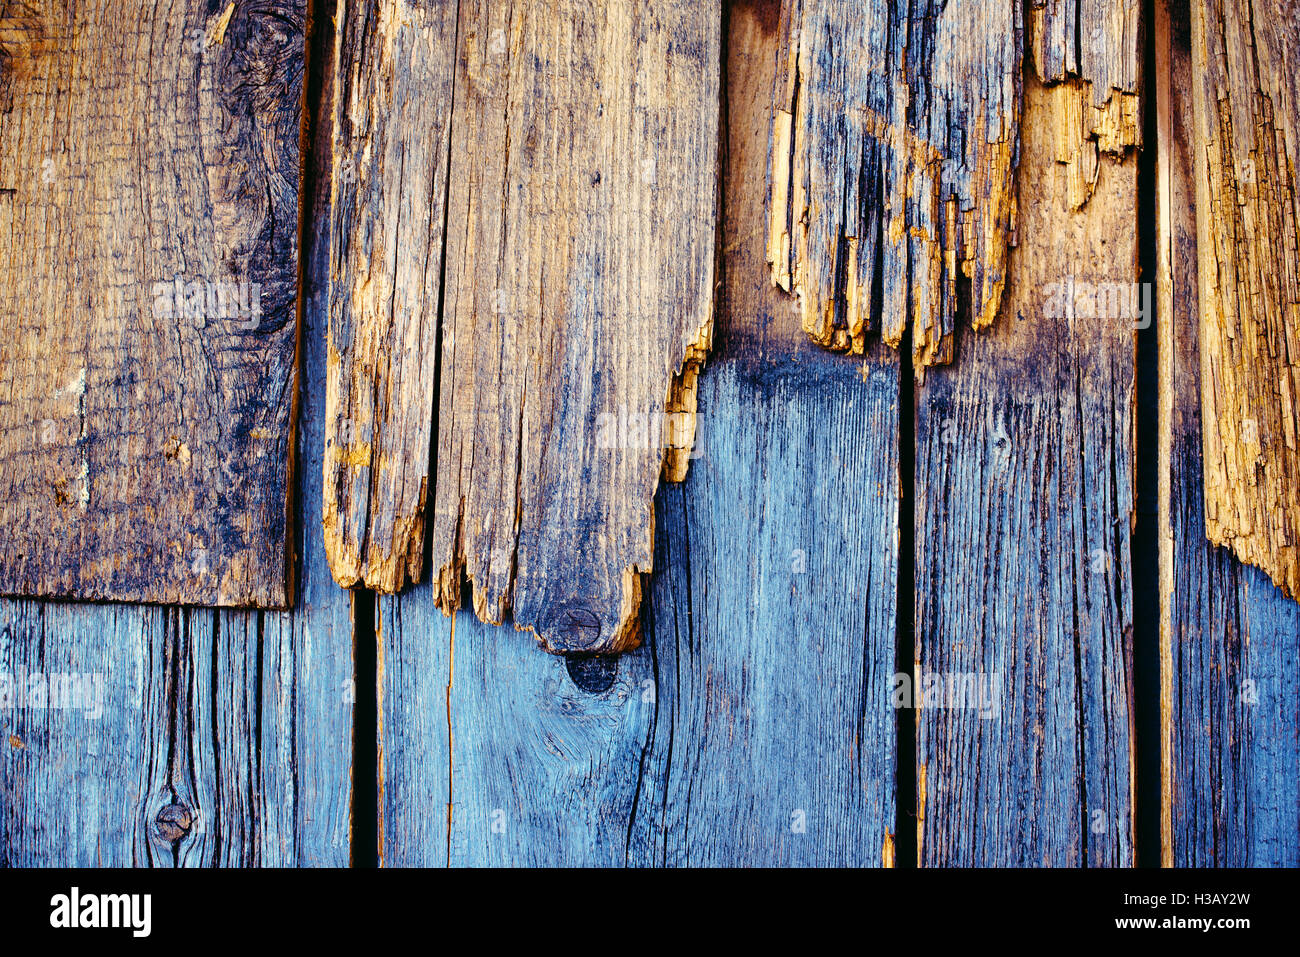 Rough weathered wood texture, obsolete wooden planks Stock Photo